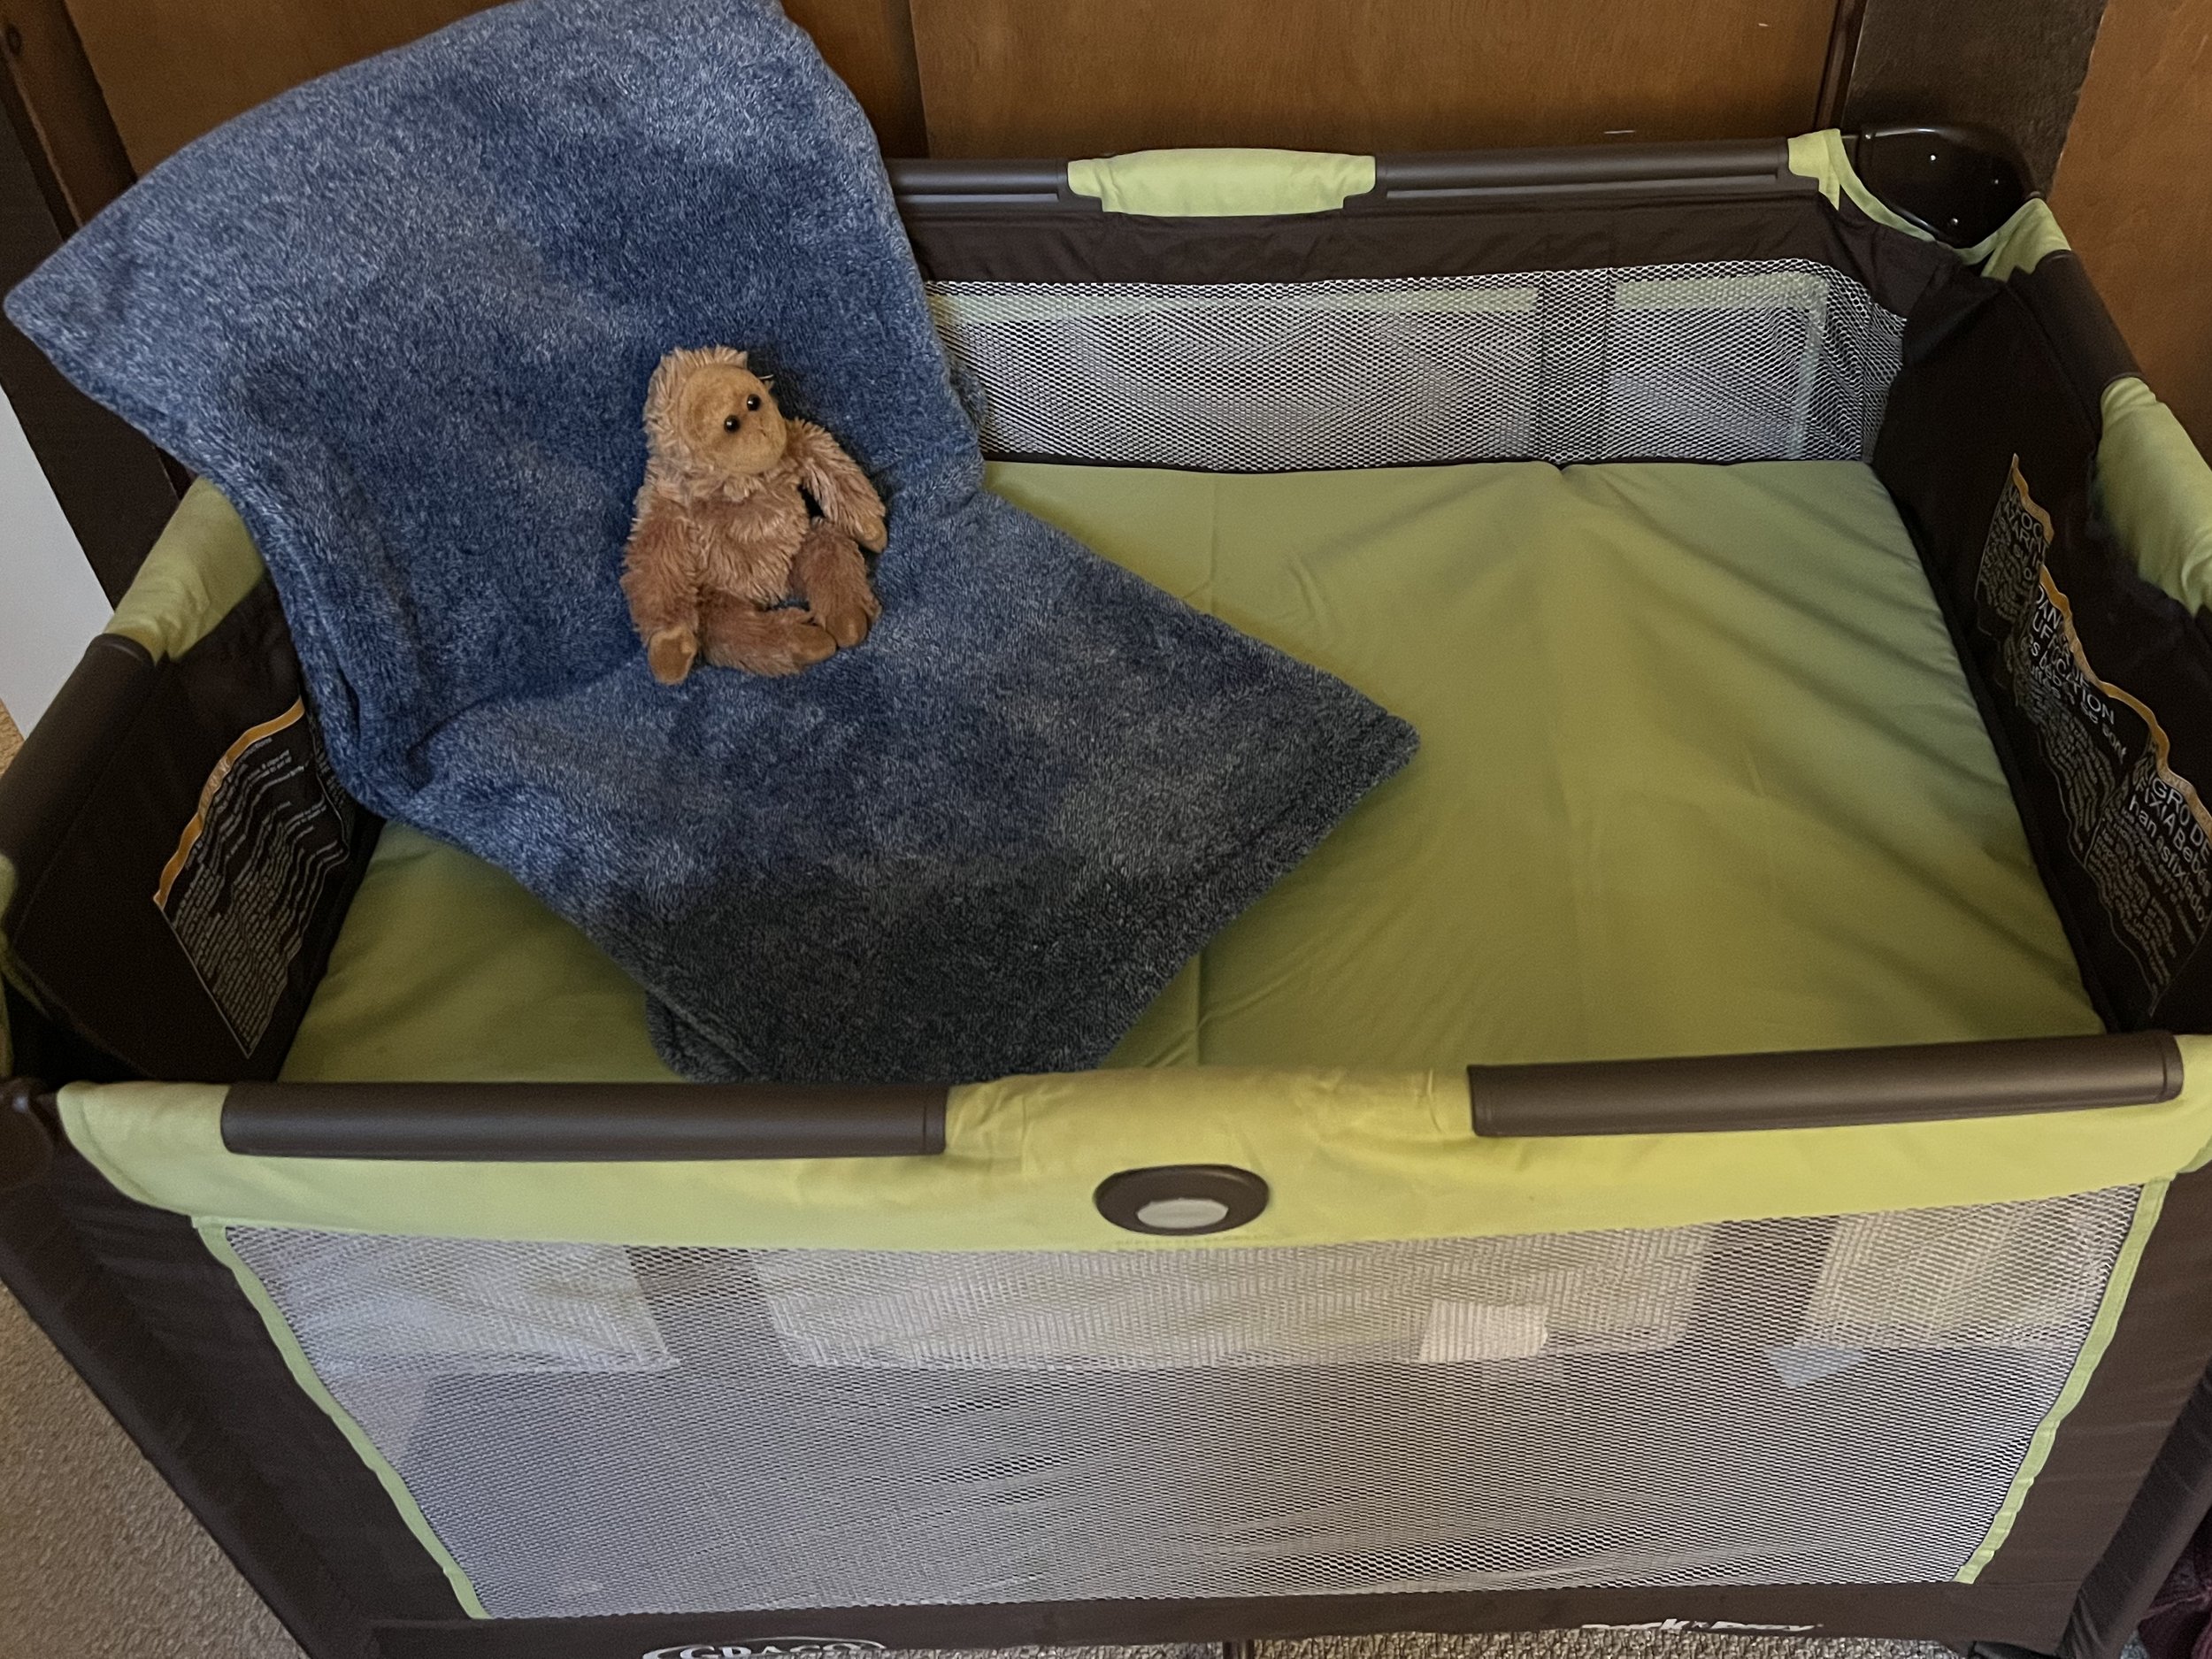 A pack-n-play for the littlest visitors